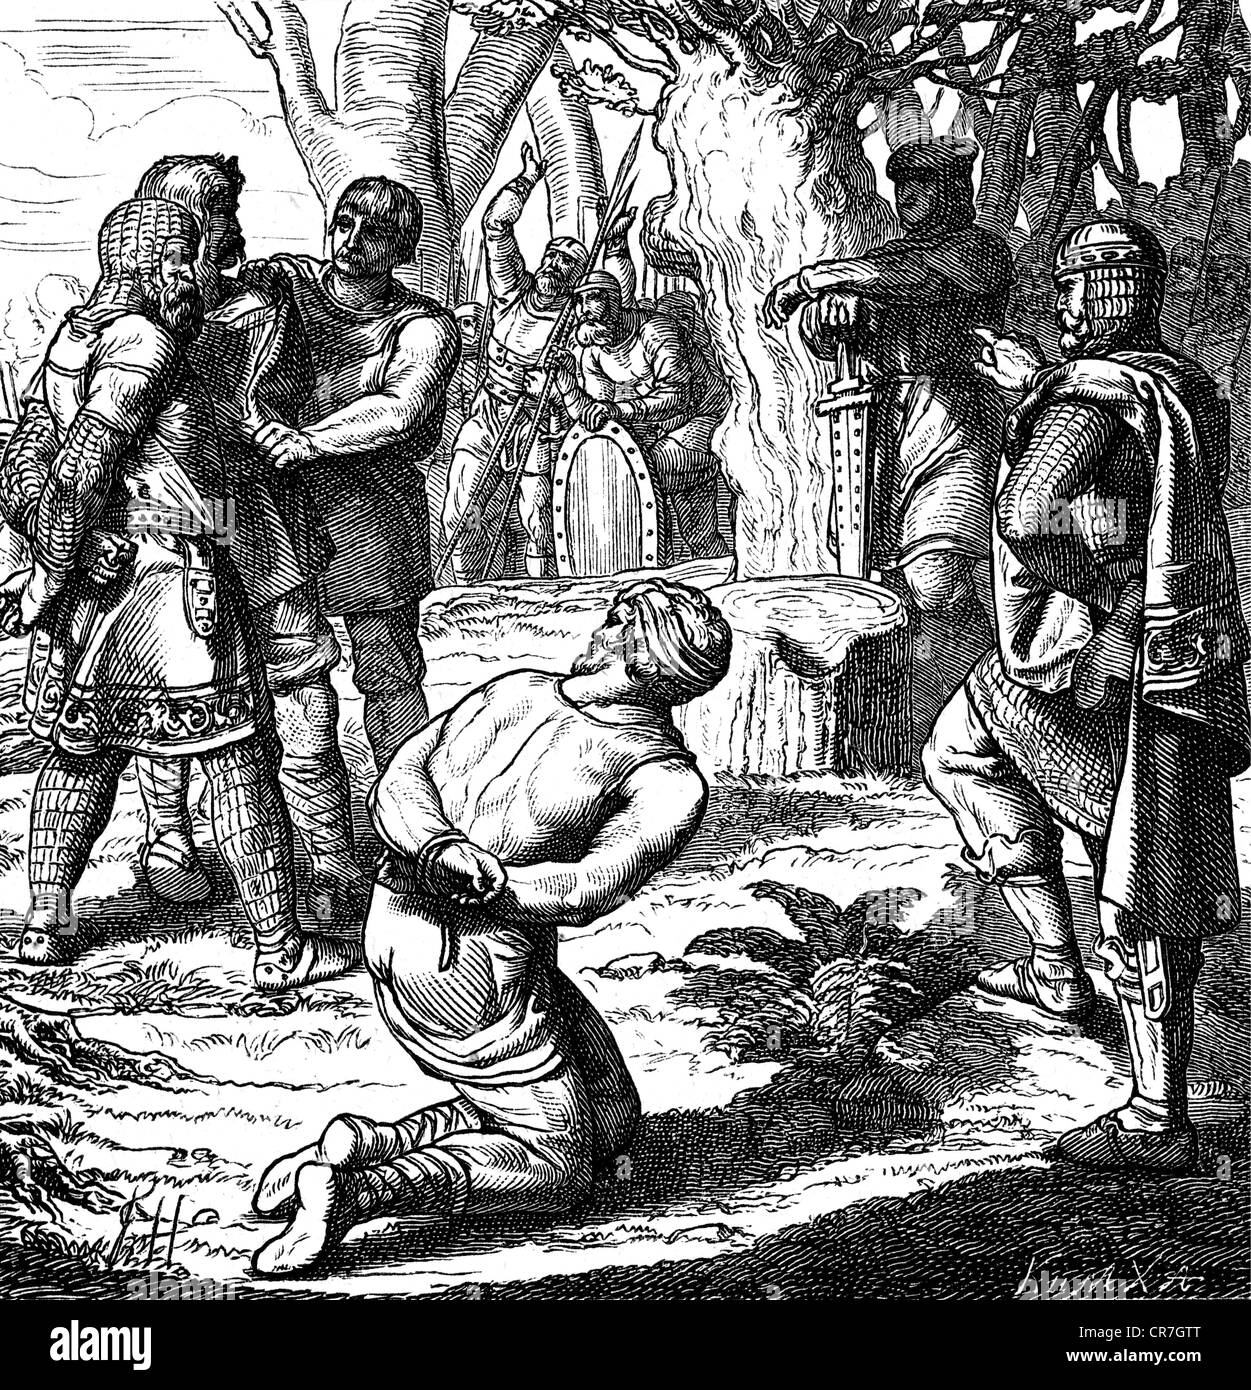 Conrad I 'the Younger', circa 881 - 23.12.918, King of East Francia 911 - 918, scene, beheading of Erchanger, Duke of Swabia, his brother Berthold and his nephew Liutfried, who are condemned as traitors, Aldingen, 21.1.917, wood engraving, 19th century, Stock Photo